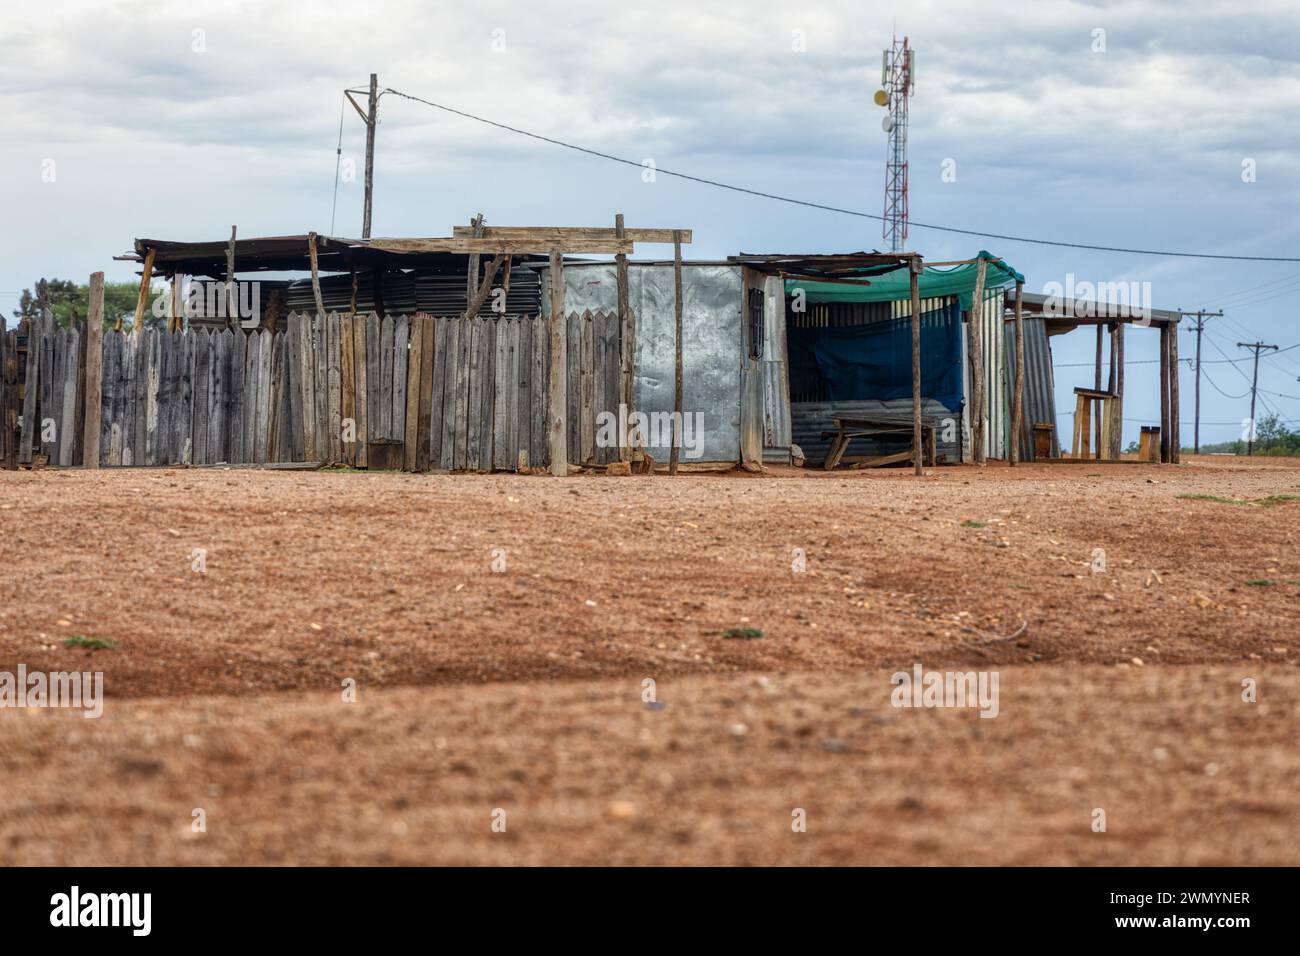 township informal settlement in africa near a hill, shack made out of corrugated iron and wood, modern facilities electricity and cellular network Stock Photo